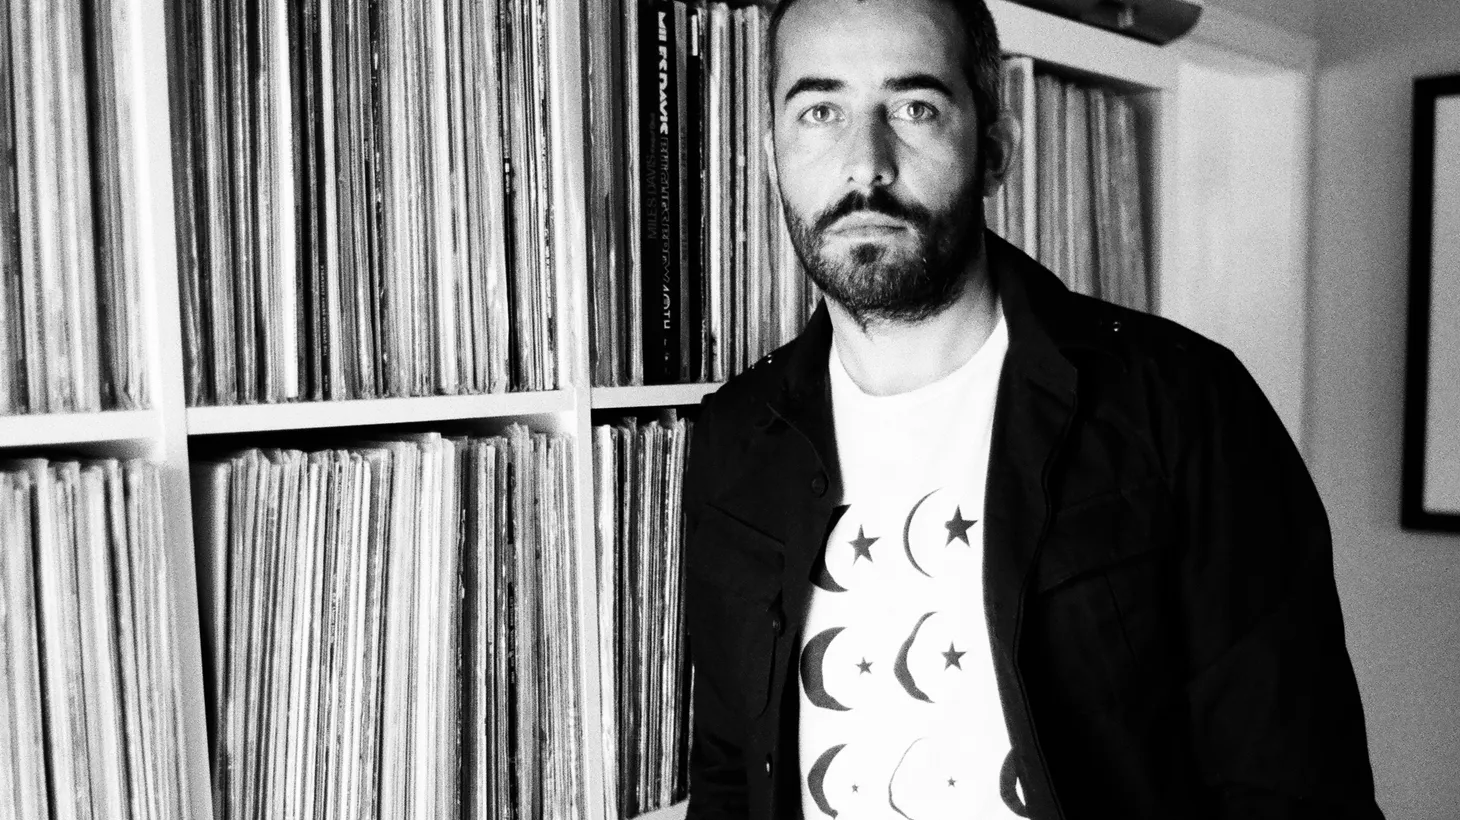 World renowned and Mathieu Schreyer's favorite, DJ Harvey joins him in the studio for an amazing guest dj set.